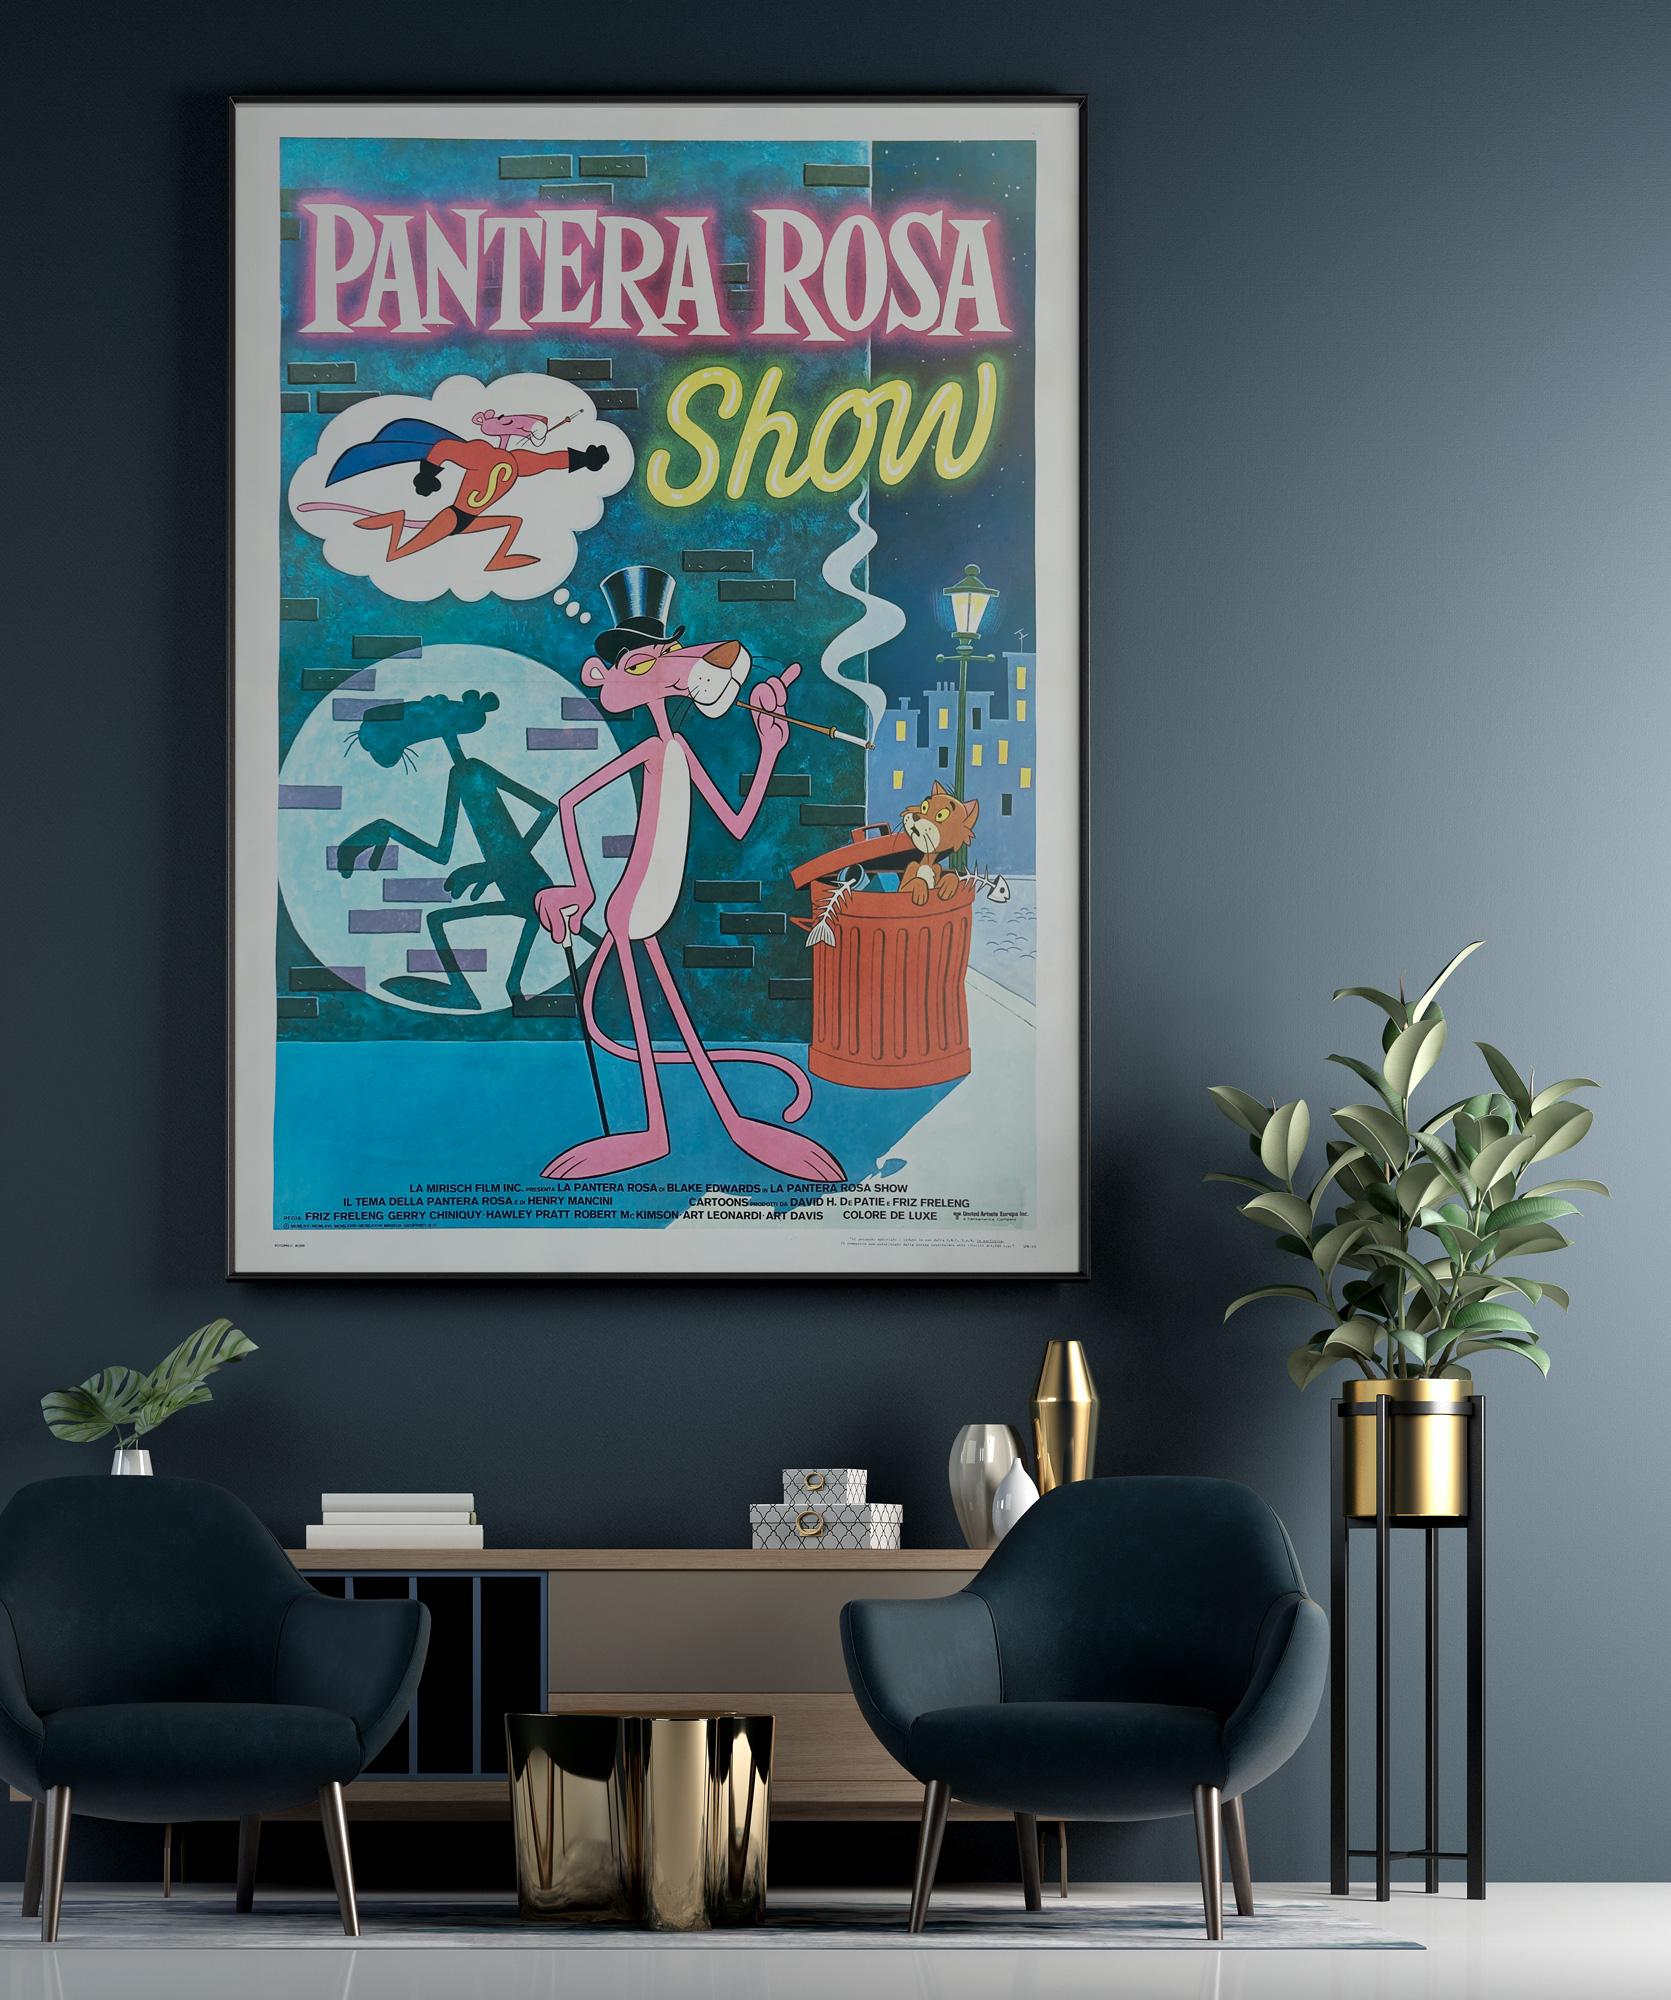 Fantastic original 1970s Italian film poster for the Pink Panther Show! Great artwork.

This vintage film poster was originally folded (as issued). It has been professionally linen-backed and is sized 39 1/2 x 54 1/2 inches (42x 57 inches